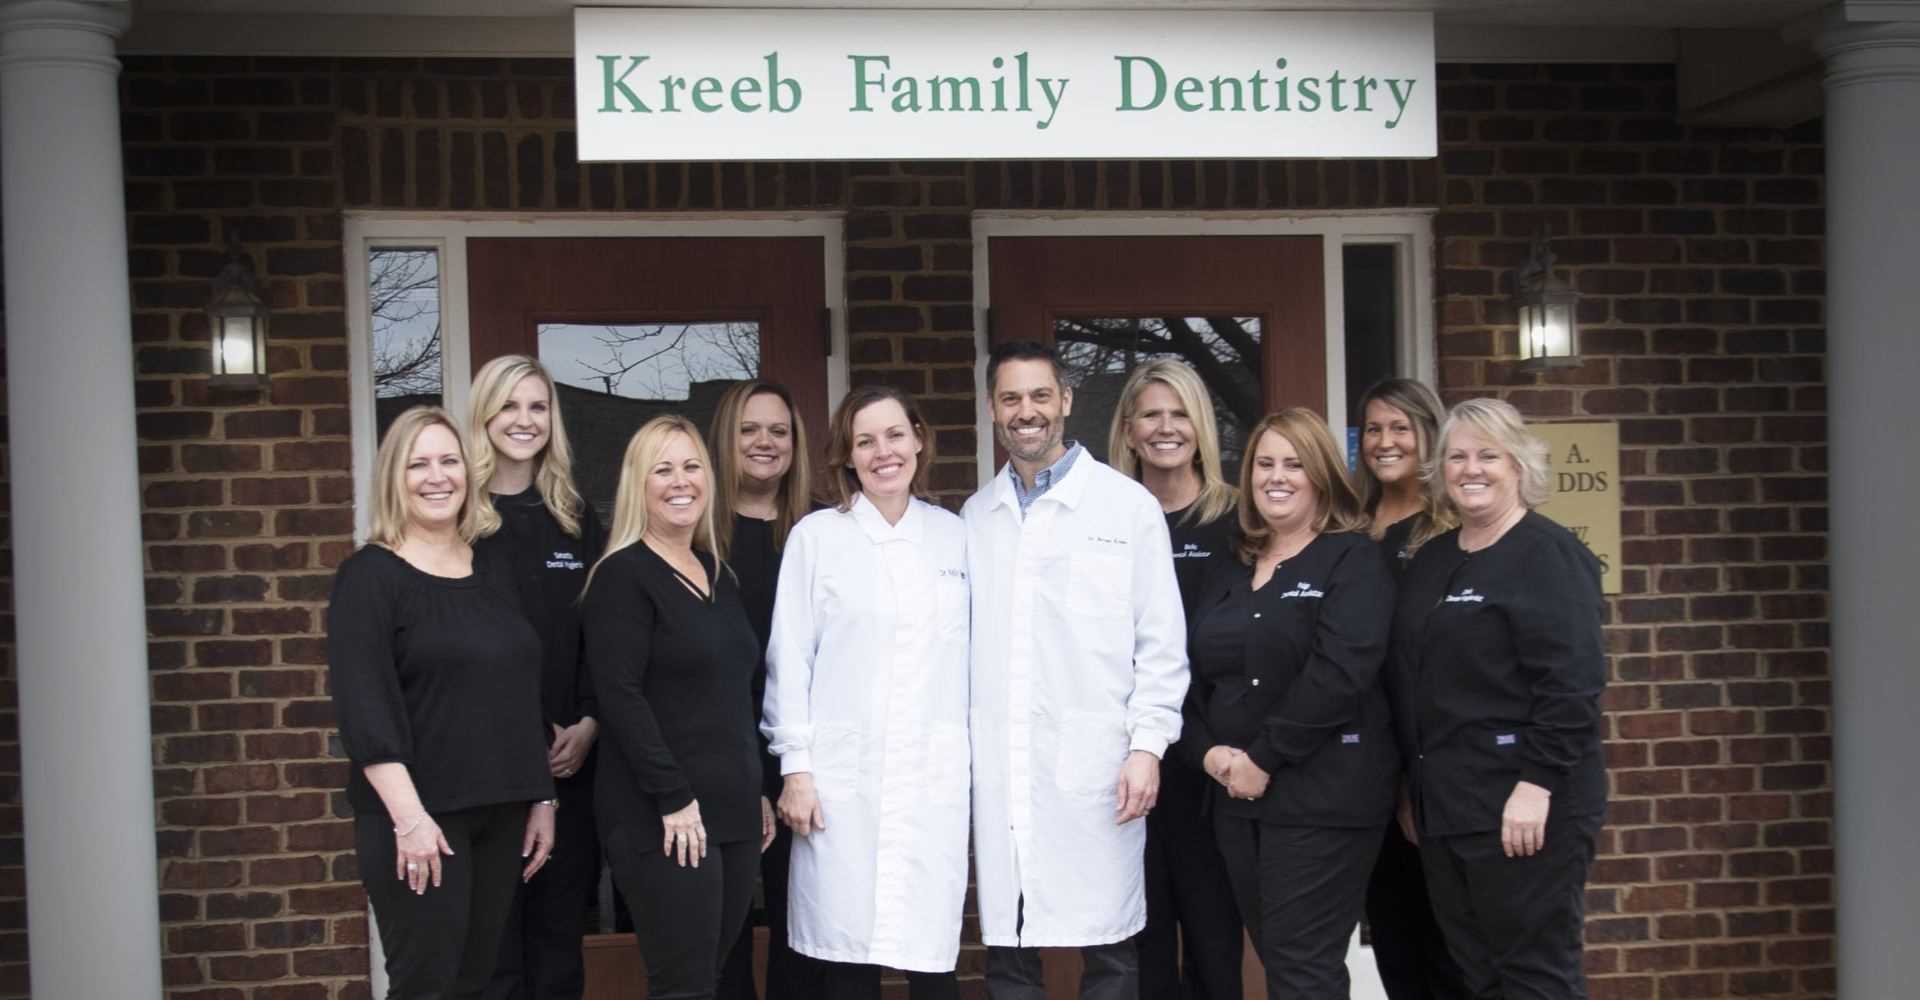 Kreeb Family Dentistry Announcing Dental Implant Services